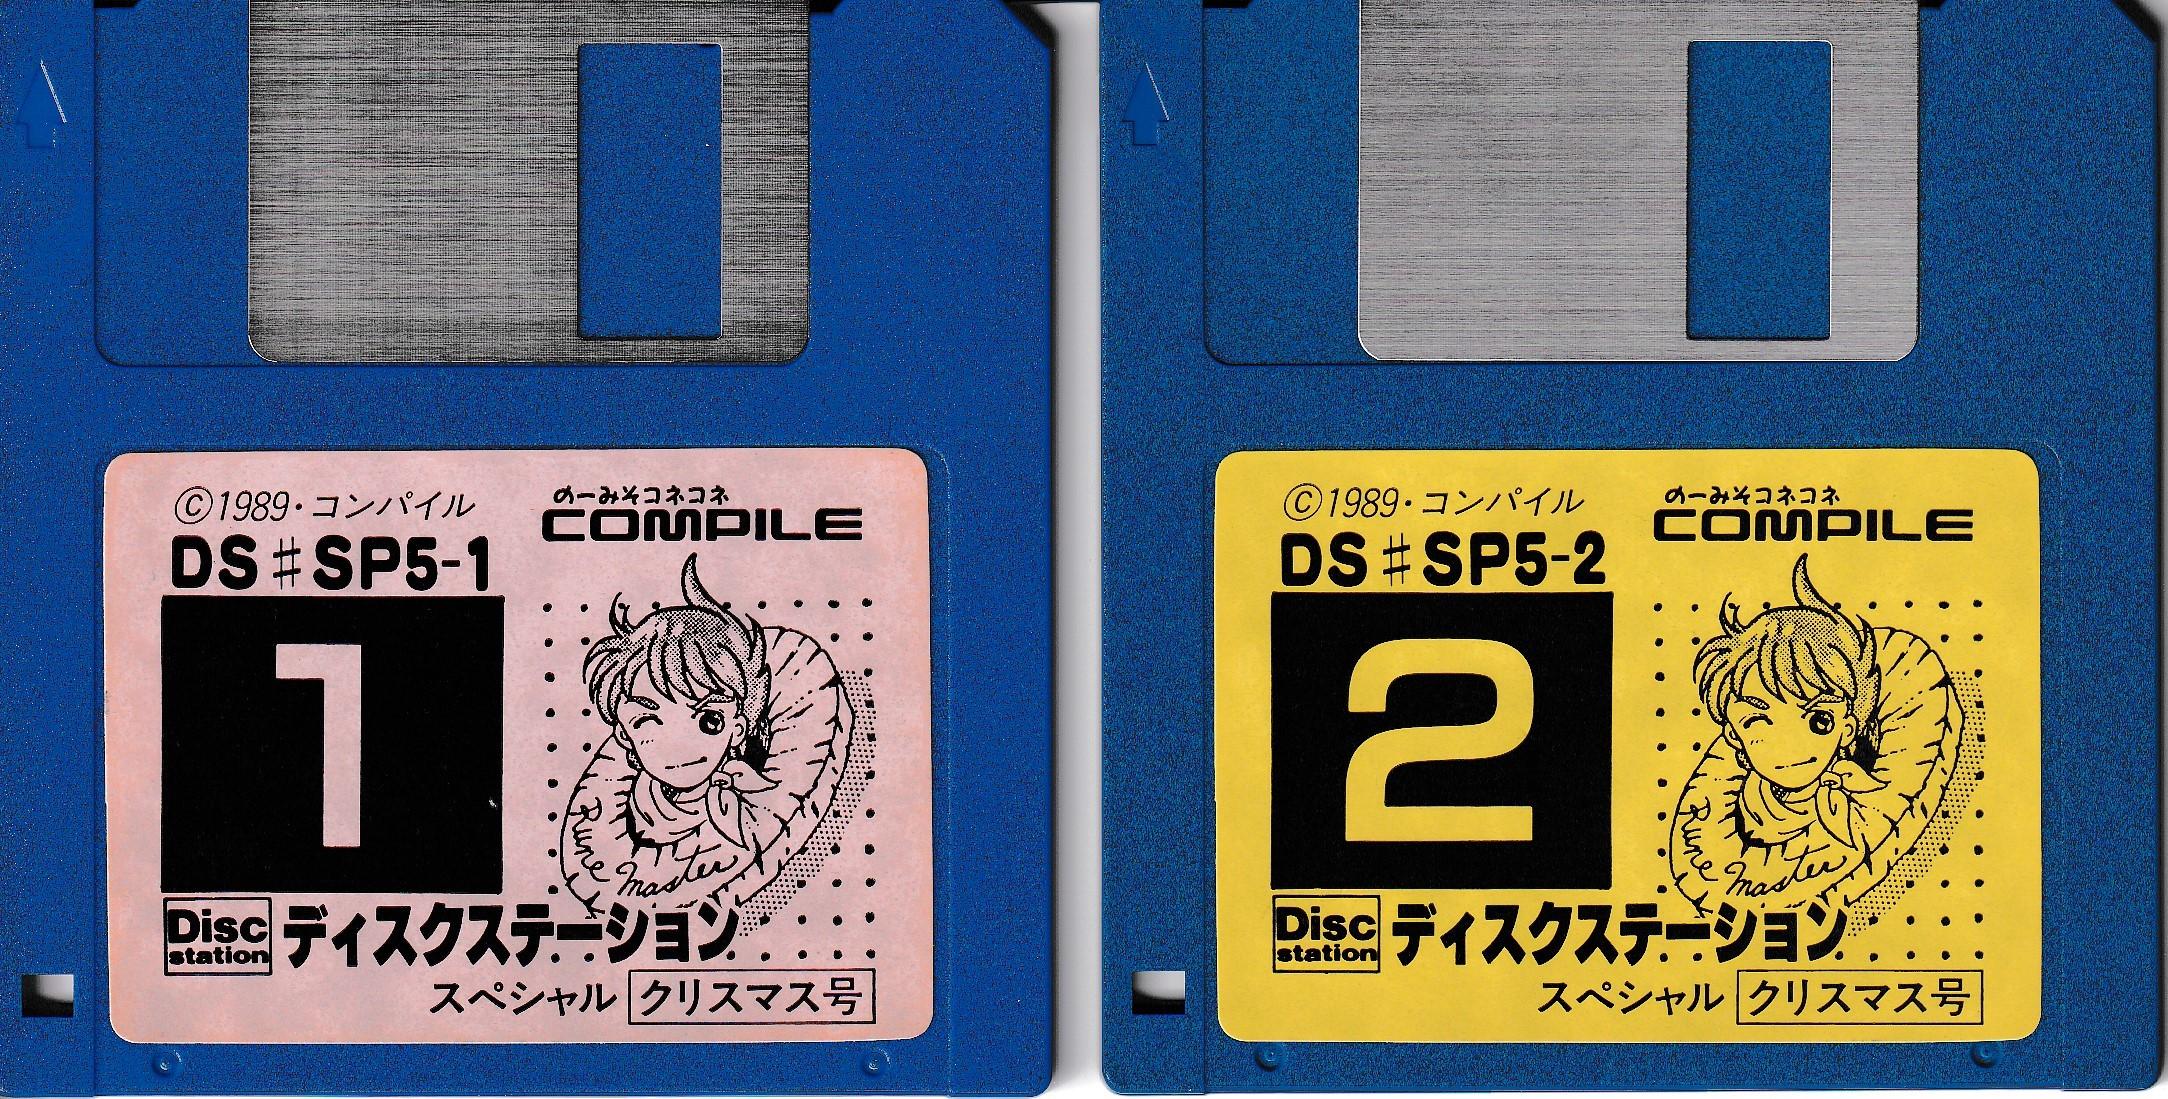 Disc Station Special 5 - Christmas Edition (1989, MSX2, Compile